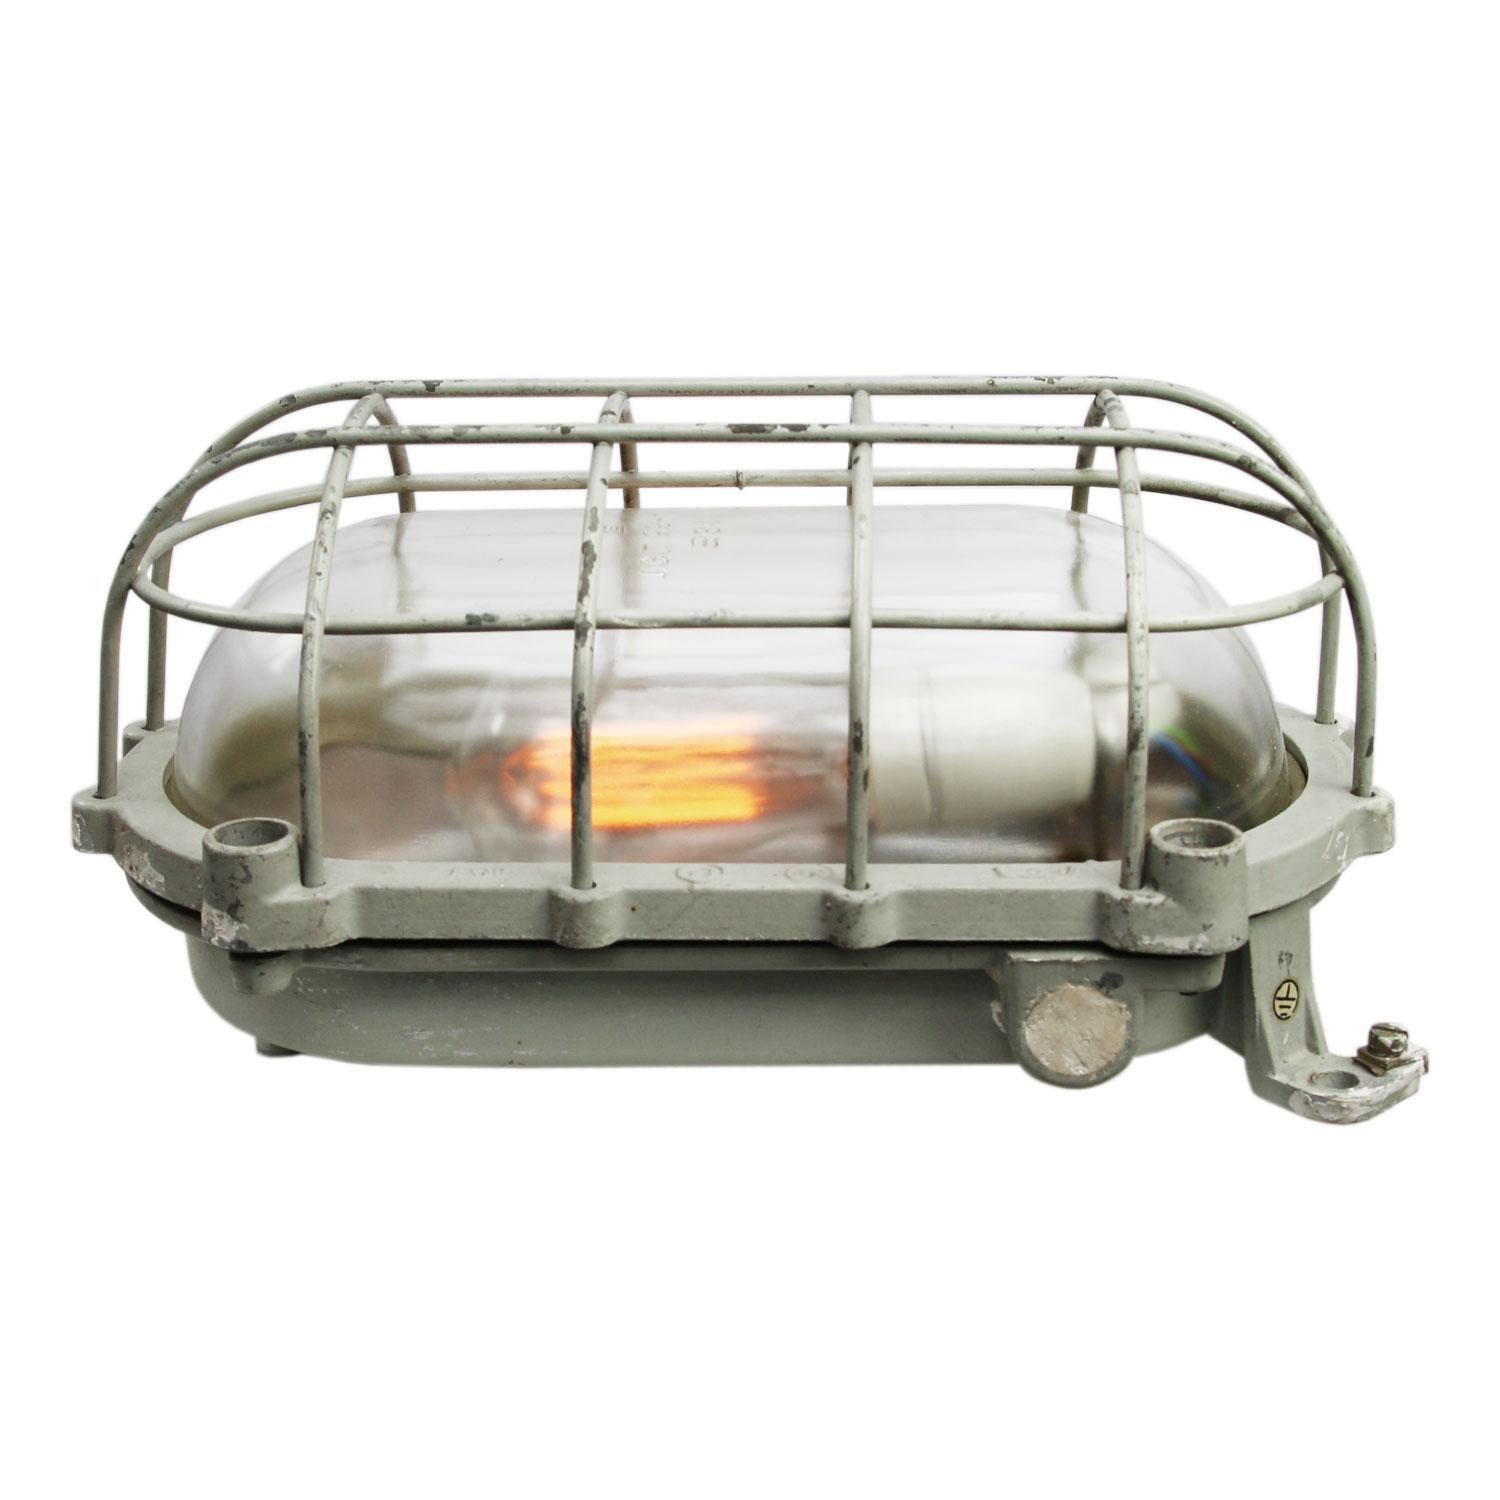 Industrial wall or ceiling lamp
cast aluminum, clear glass

Weight: 3.30 kg / 7.3 lb

Priced per individual item. All lamps have been made suitable by international standards for incandescent light bulbs, energy-efficient and LED bulbs. E26/E27